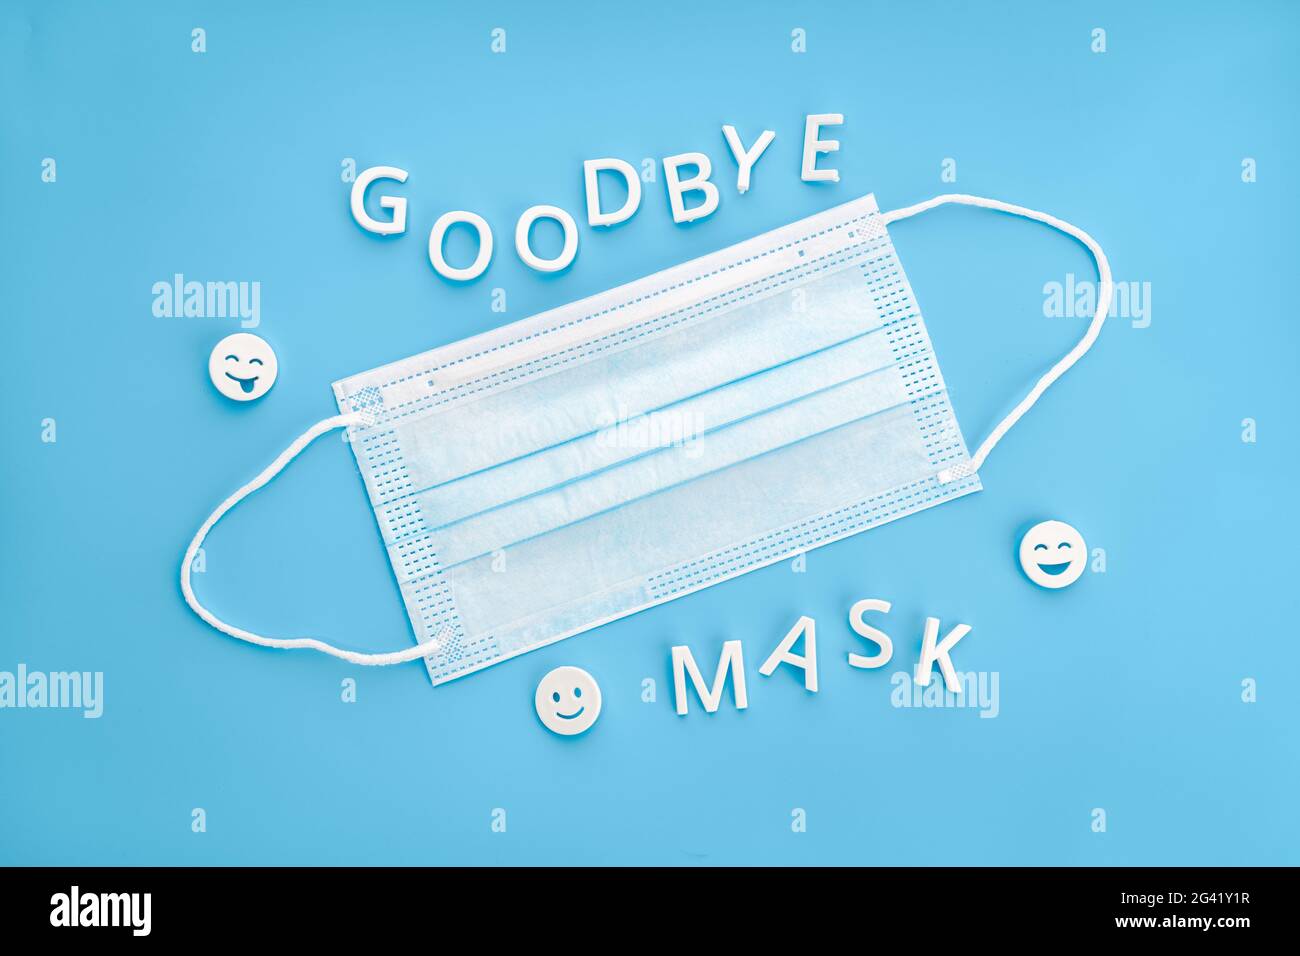 Goodbye mask phrase and face mask isolated on blue background. Concept of no longer be required to wear face masks Stock Photo